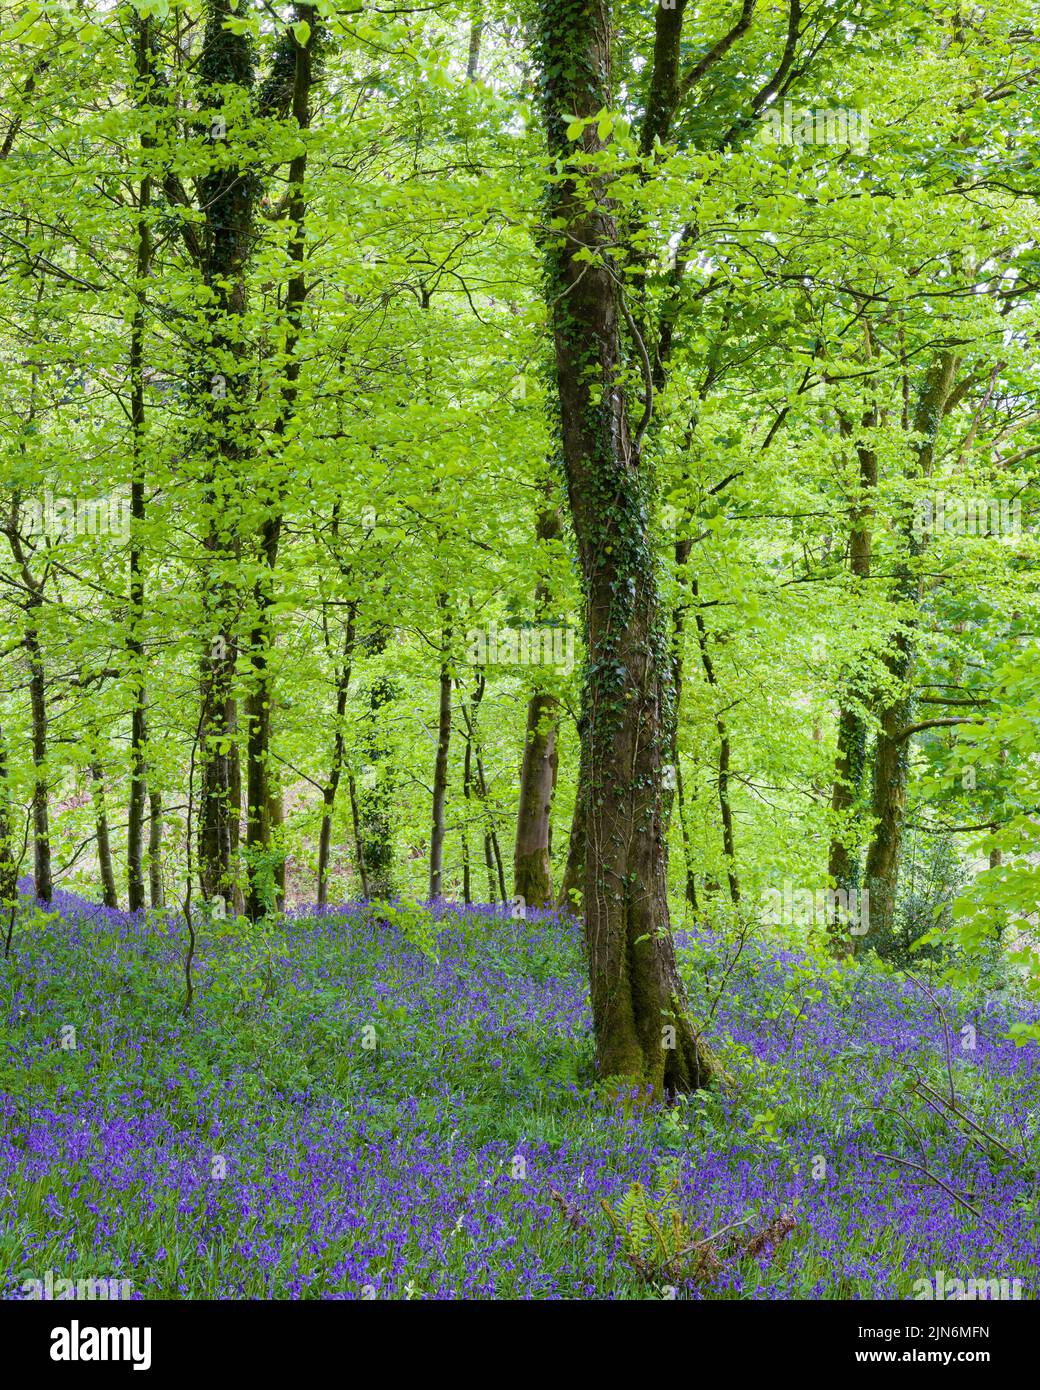 Bluebells (Hyacinthoides non scripta) in flower in a woodland at Cothelstone Hill in the Quantock Hills, Somerset, England. Stock Photo